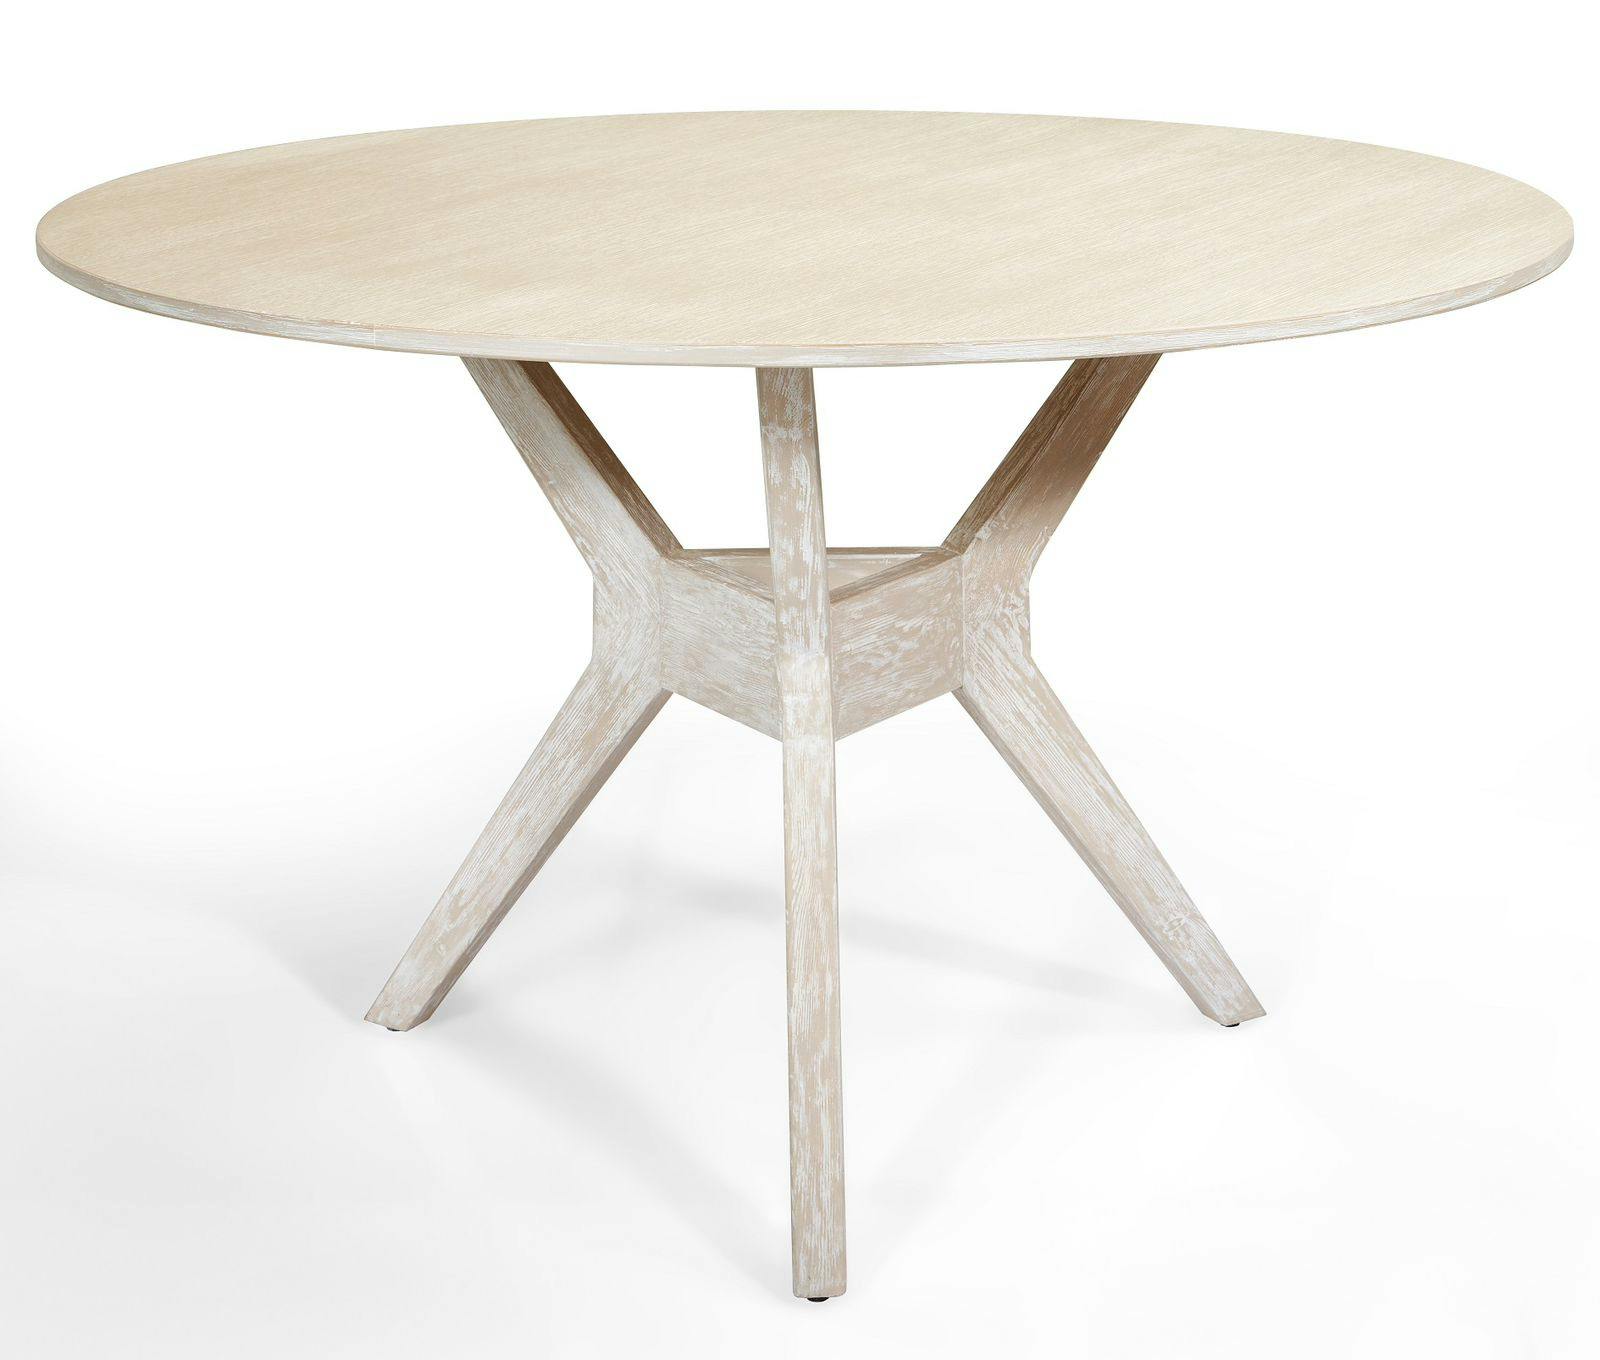 Connect Dining Table - Round 120 cm 1